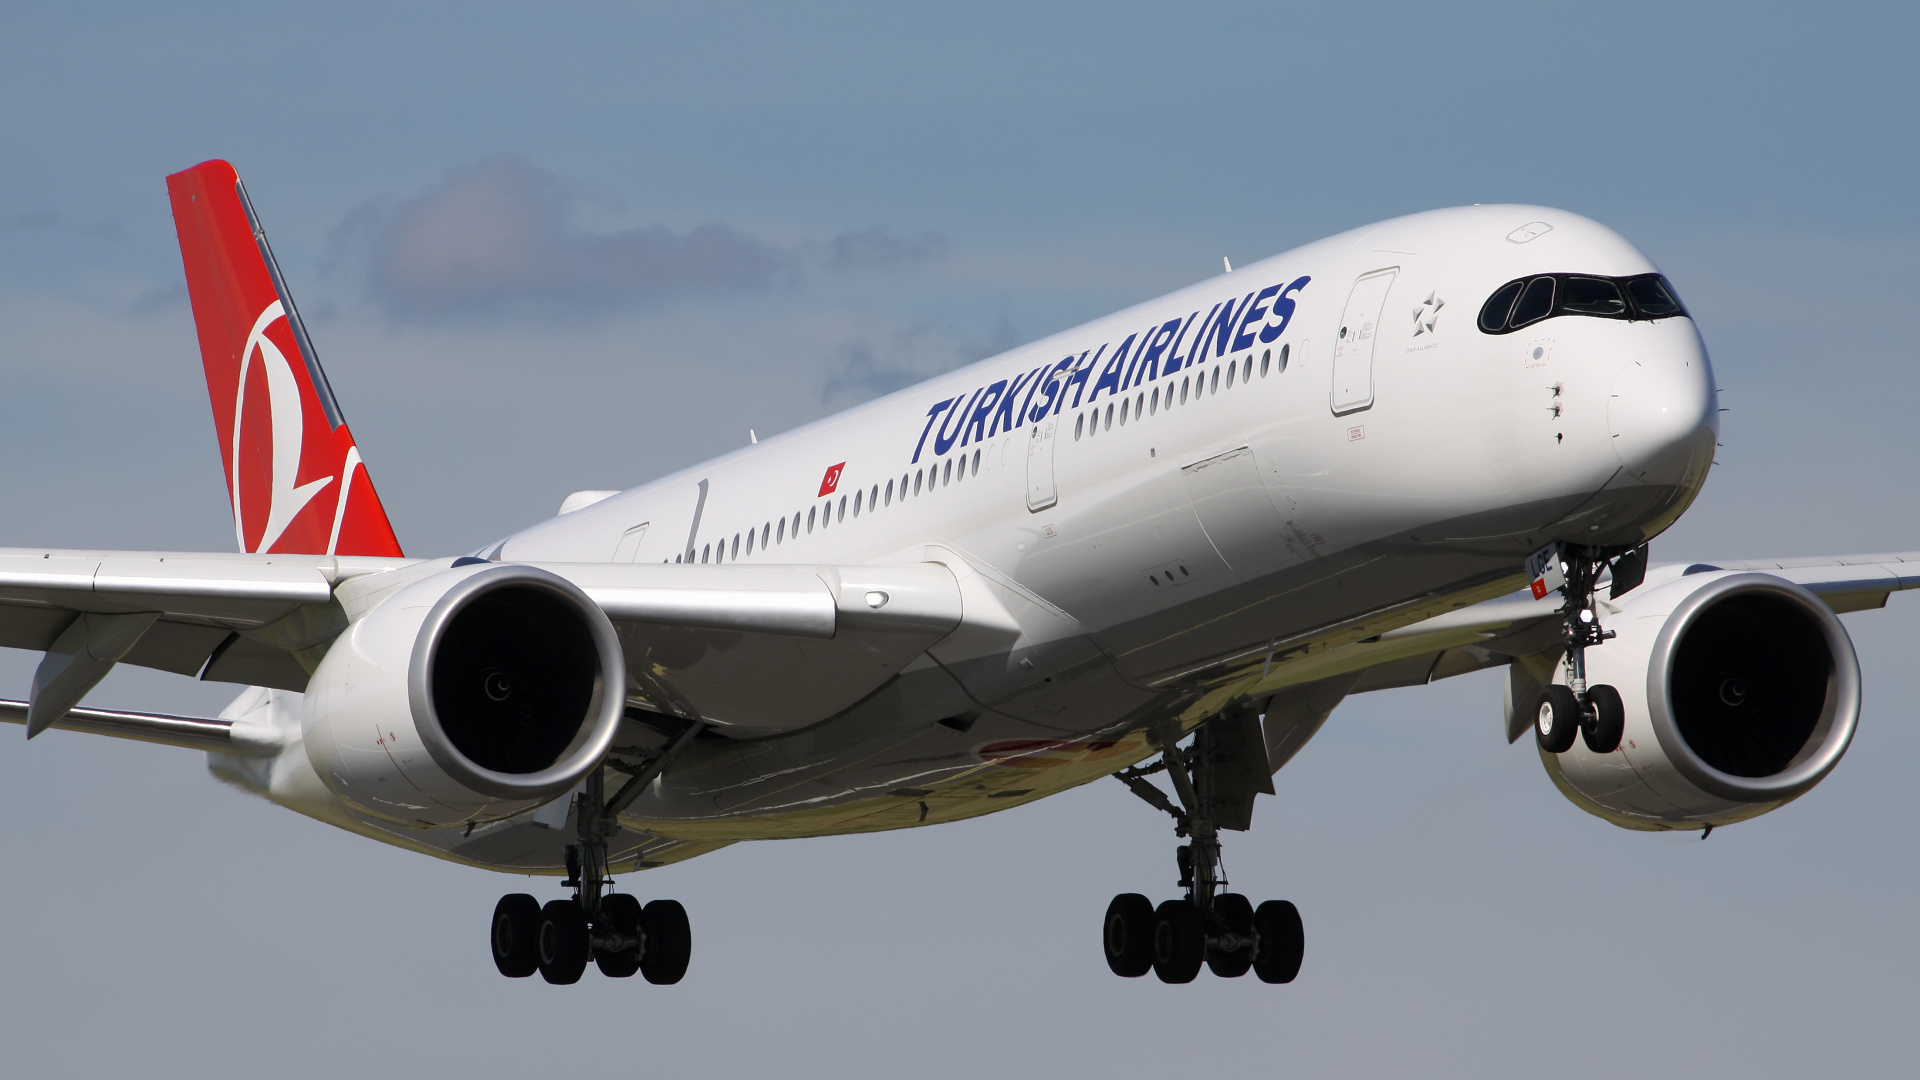 TC-LGE (Aircraft » Schiphol Spotting » Airbus A350-900 » THY Turkish Airlines)